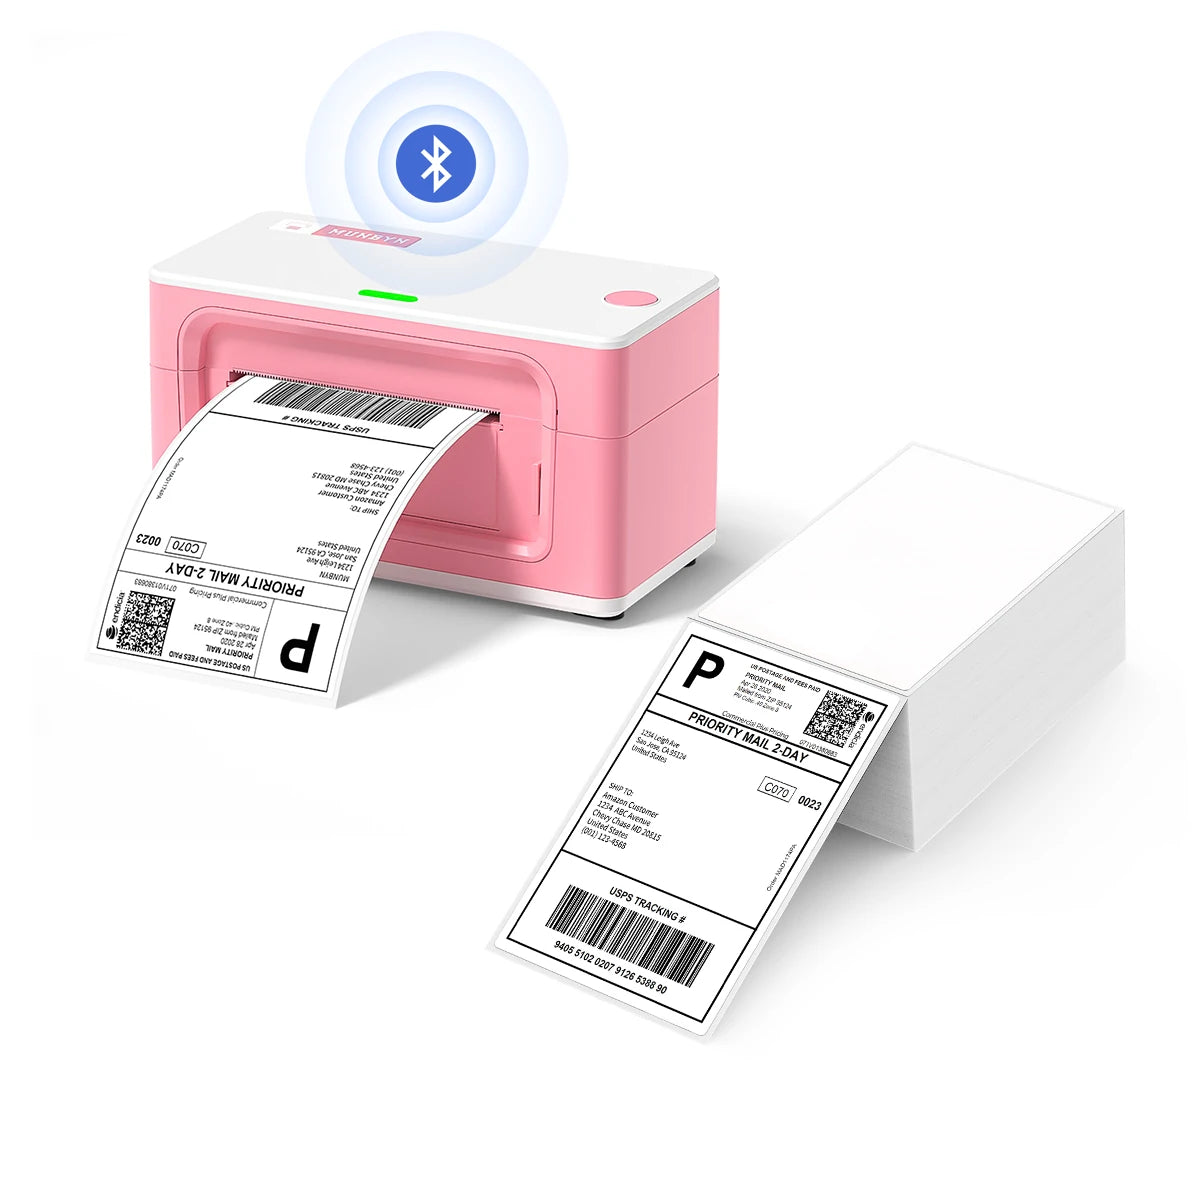 MUNBYN P941B Bluetooth label printer kit includes a label printer and a stack of shipping labels.